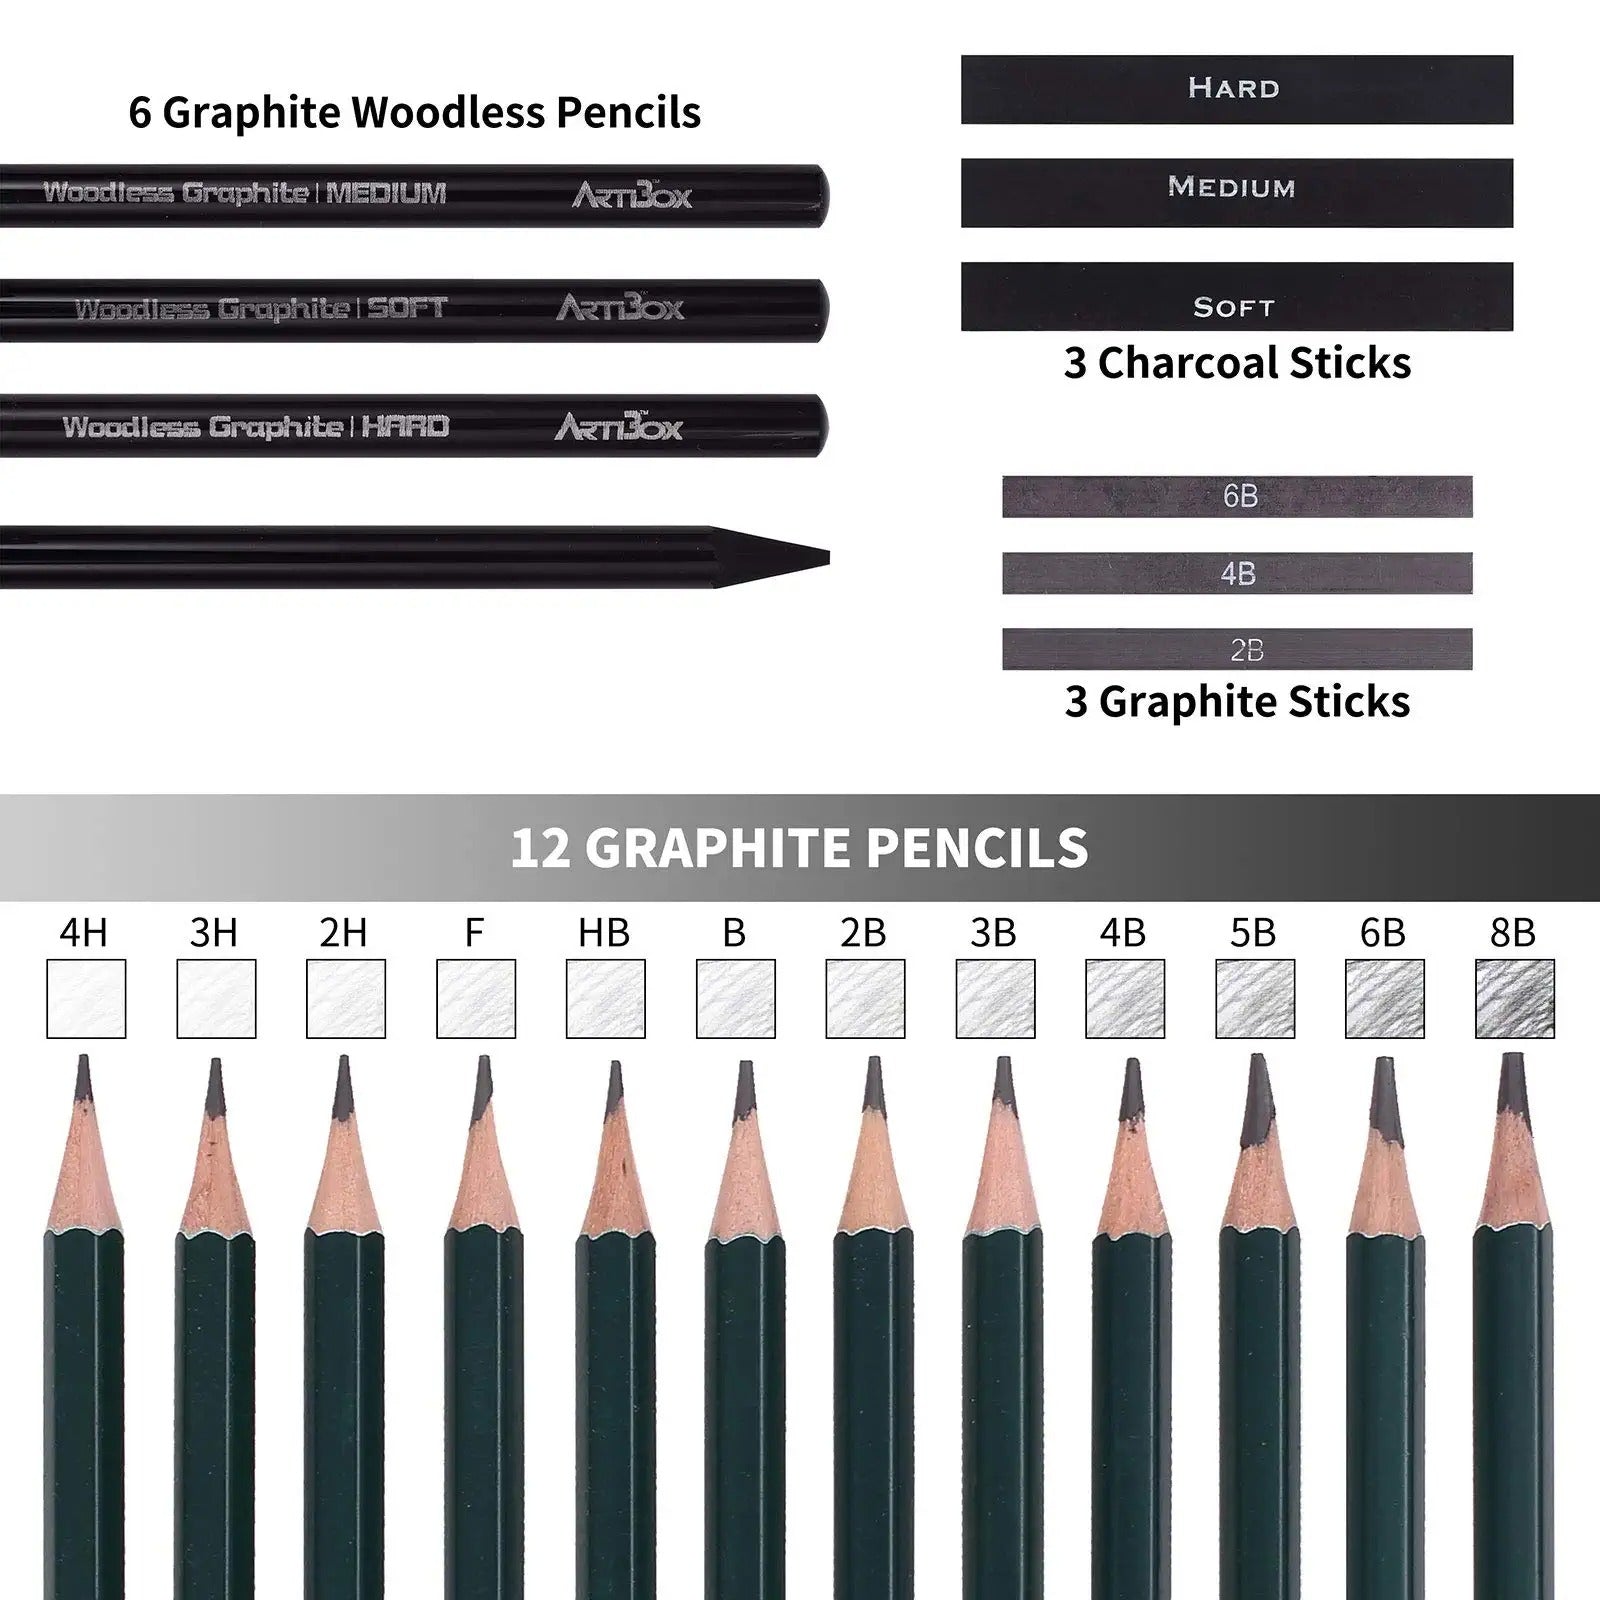 Drawing Pencils - 17 Piece Sketch Pencils Set, Professional Drawing Pencils for Sketching, Kneaded Erasers, 3 Blending Stumps - 12 Graphite Pencils